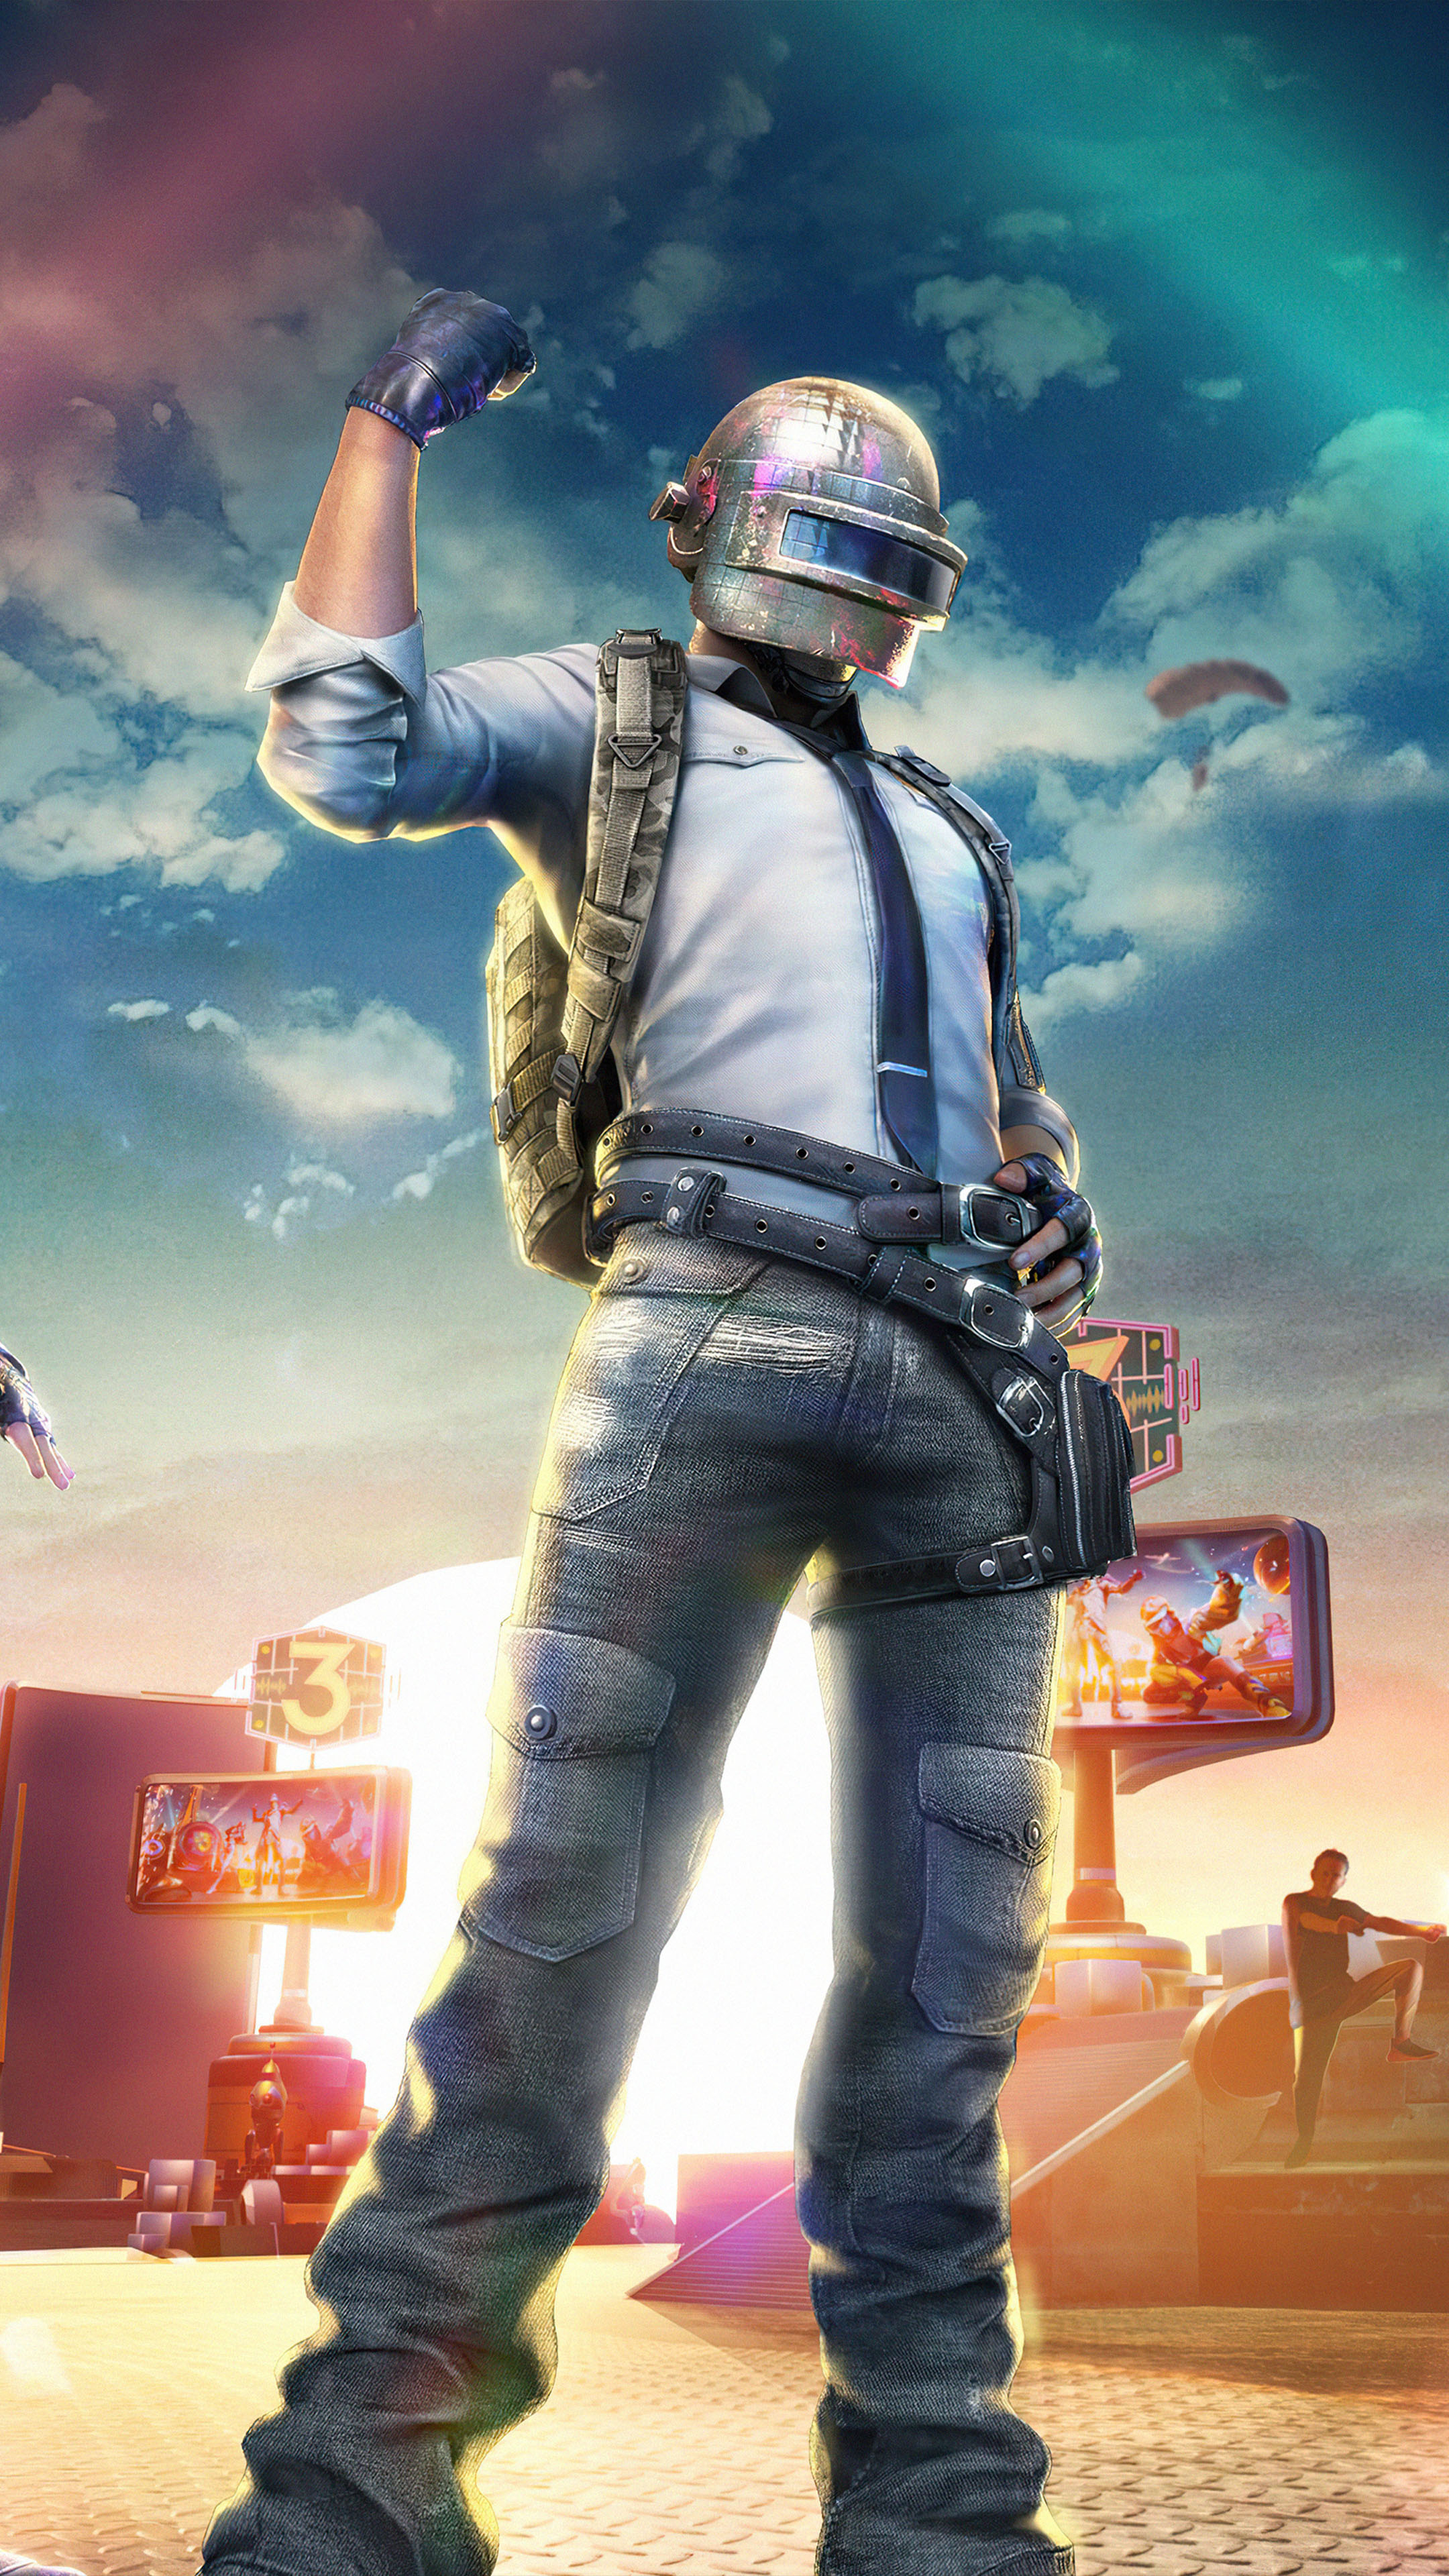 13 PUBG Mobile Wallpapers for iPhone and Android! - The RamenSwag